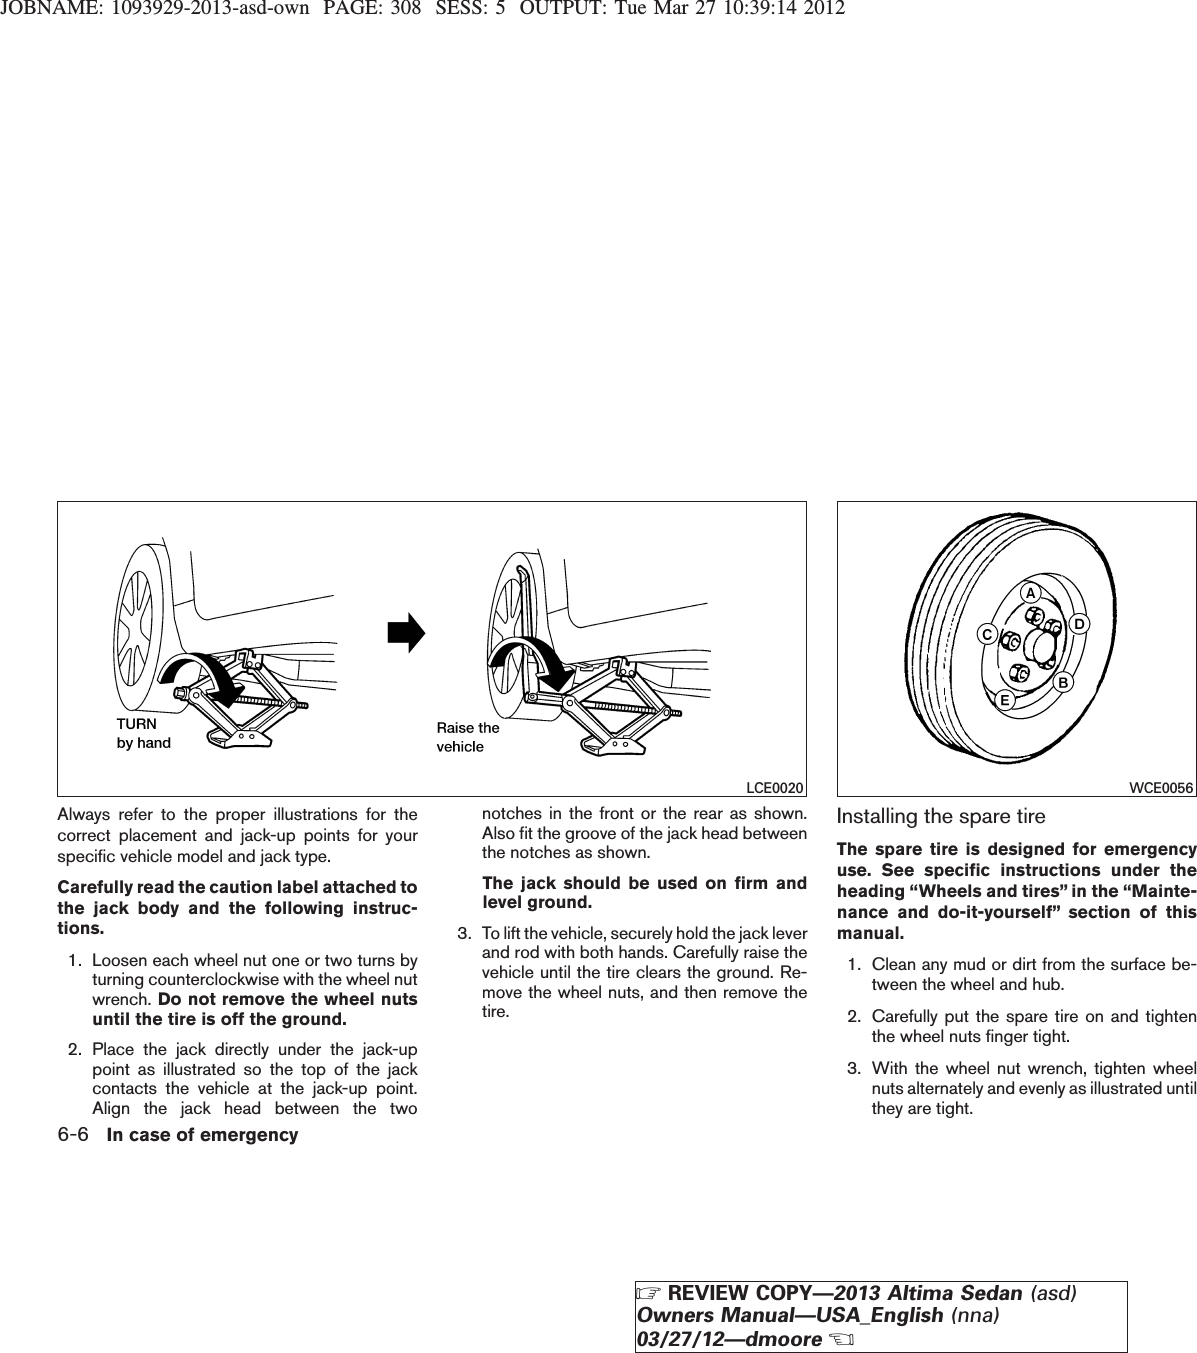 JOBNAME: 1093929-2013-asd-own PAGE: 308 SESS: 5 OUTPUT: Tue Mar 27 10:39:14 2012Always refer to the proper illustrations for thecorrect placement and jack-up points for yourspecific vehicle model and jack type.Carefully read the caution label attached tothe jack body and the following instruc-tions.1. Loosen each wheel nut one or two turns byturning counterclockwise with the wheel nutwrench. Do not remove the wheel nutsuntil the tire is off the ground.2. Place the jack directly under the jack-uppoint as illustrated so the top of the jackcontacts the vehicle at the jack-up point.Align the jack head between the twonotches in the front or the rear as shown.Also fit the groove of the jack head betweenthe notches as shown.The jack should be used on firm andlevel ground.3. To lift the vehicle, securely hold the jack leverand rod with both hands. Carefully raise thevehicle until the tire clears the ground. Re-move the wheel nuts, and then remove thetire.Installing the spare tireThe spare tire is designed for emergencyuse. See specific instructions under theheading “Wheels and tires” in the “Mainte-nance and do-it-yourself” section of thismanual.1. Clean any mud or dirt from the surface be-tween the wheel and hub.2. Carefully put the spare tire on and tightenthe wheel nuts finger tight.3. With the wheel nut wrench, tighten wheelnuts alternately and evenly as illustrated untilthey are tight.LCE0020 WCE00566-6 In case of emergencyZREVIEW COPY—2013 Altima Sedan (asd)Owners Manual—USA_English (nna)03/27/12—dmooreX